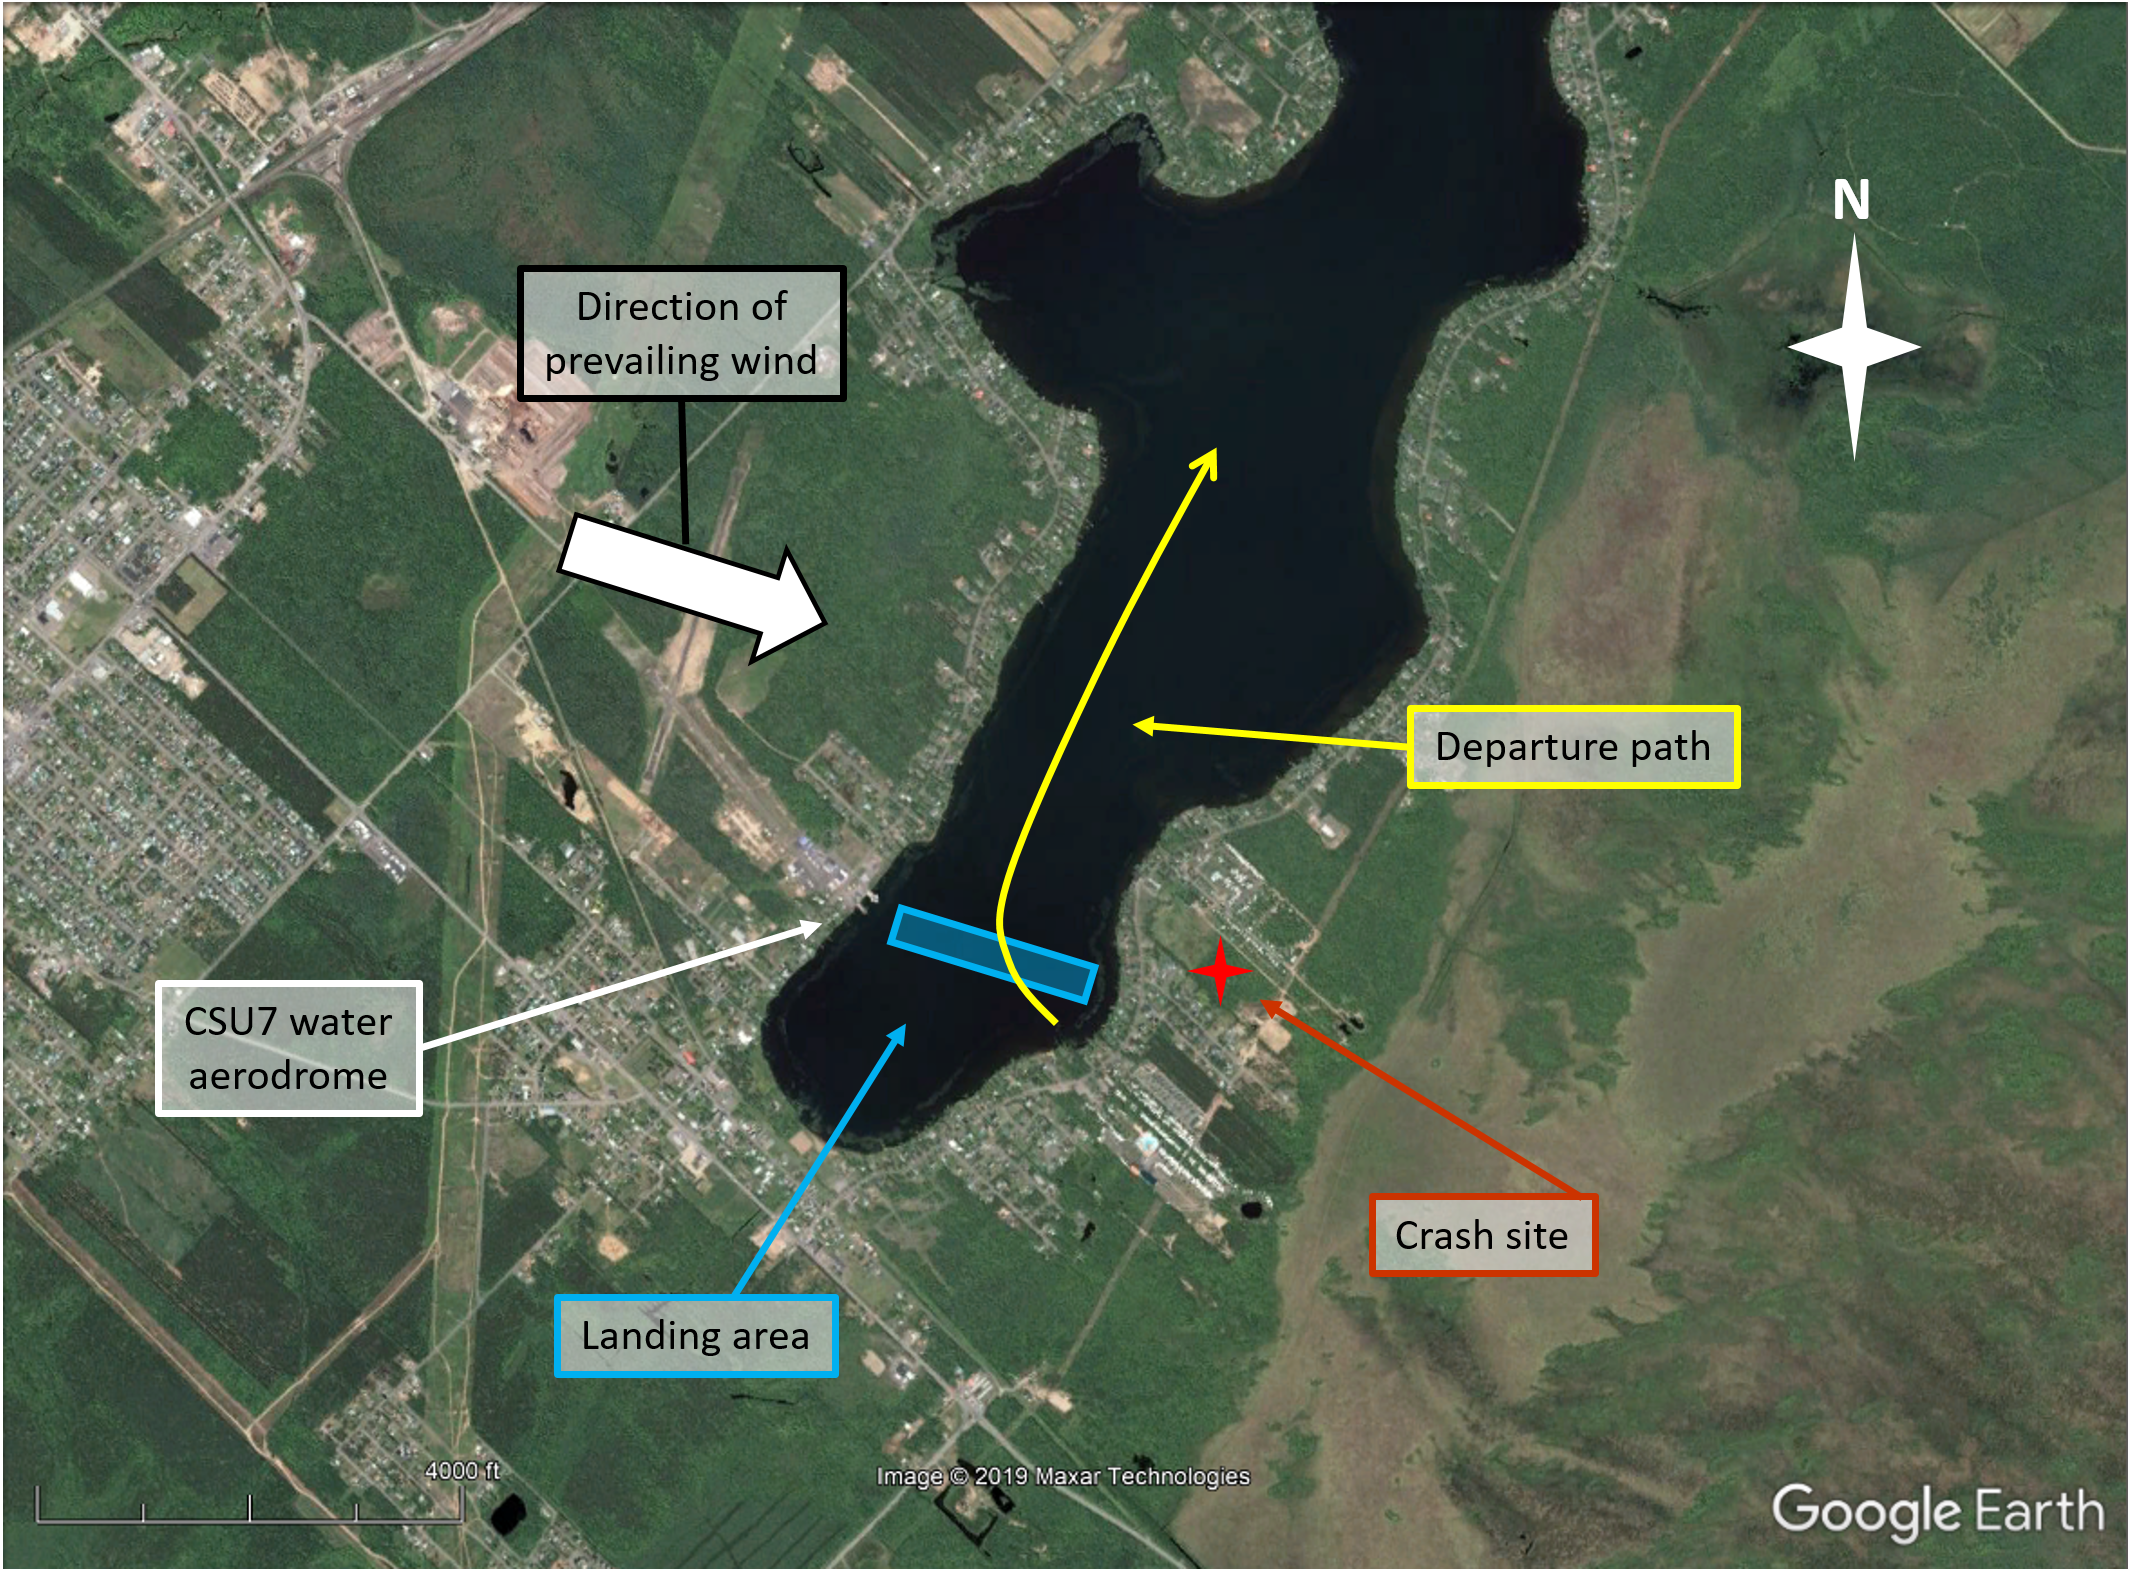 Map showing the departure path, the landing area, the direction of the prevailing wind and the crash site (Source: Google Earth, with TSB annotations)